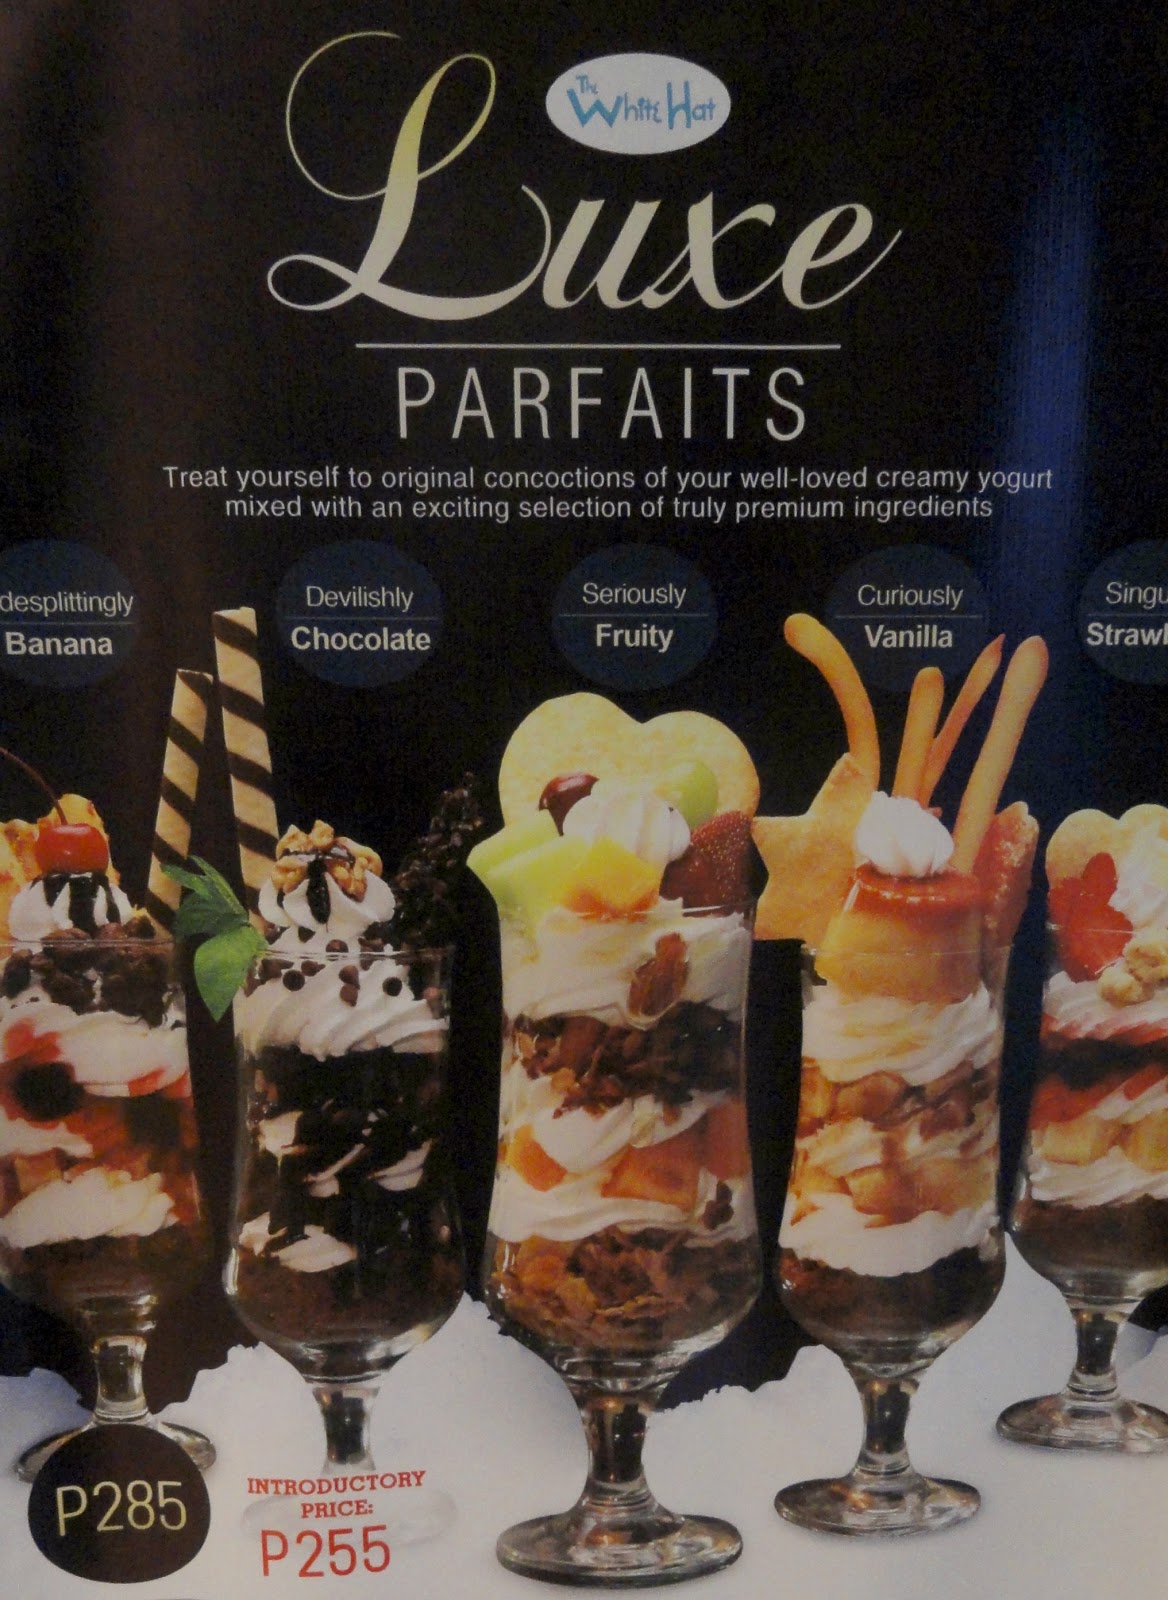 Flavors of the Luxe Parfait by The White Hat